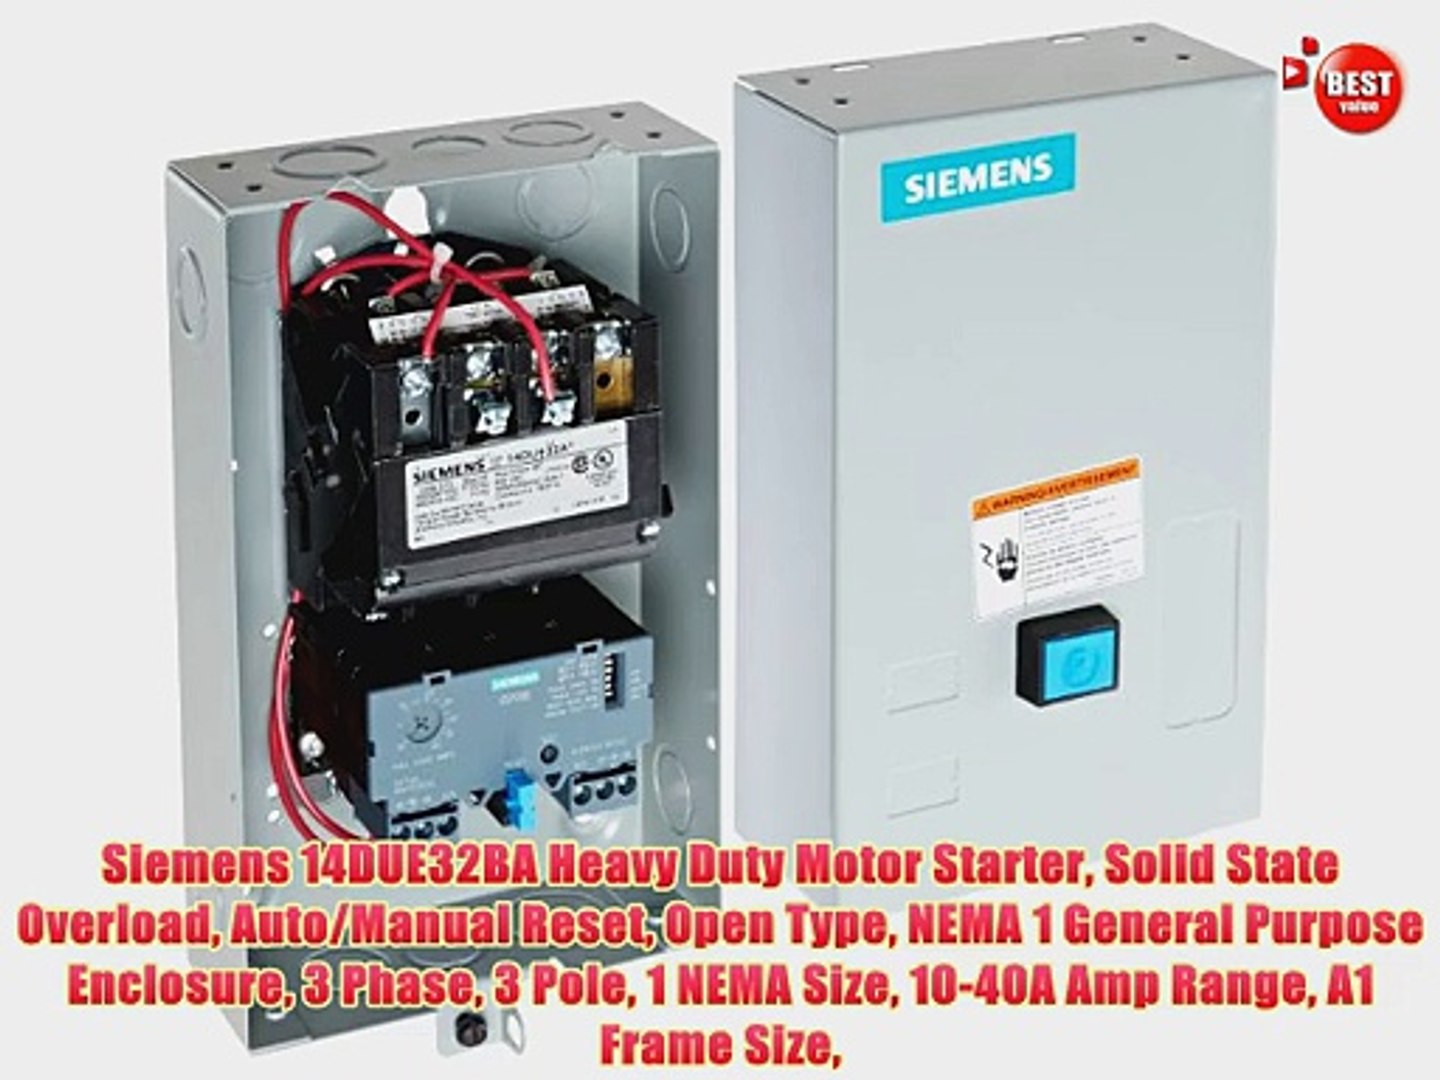 10-40A Amp Range Siemens 14DUE32BA Heavy Duty Motor Starter 3 Phase A1 Frame Size 3 Pole Auto/Manual Reset Solid State Overload NEMA 1 General Purpose Enclosure 1 NEMA Size Open Type 110-120/220-240 at 60Hz Coil Voltage